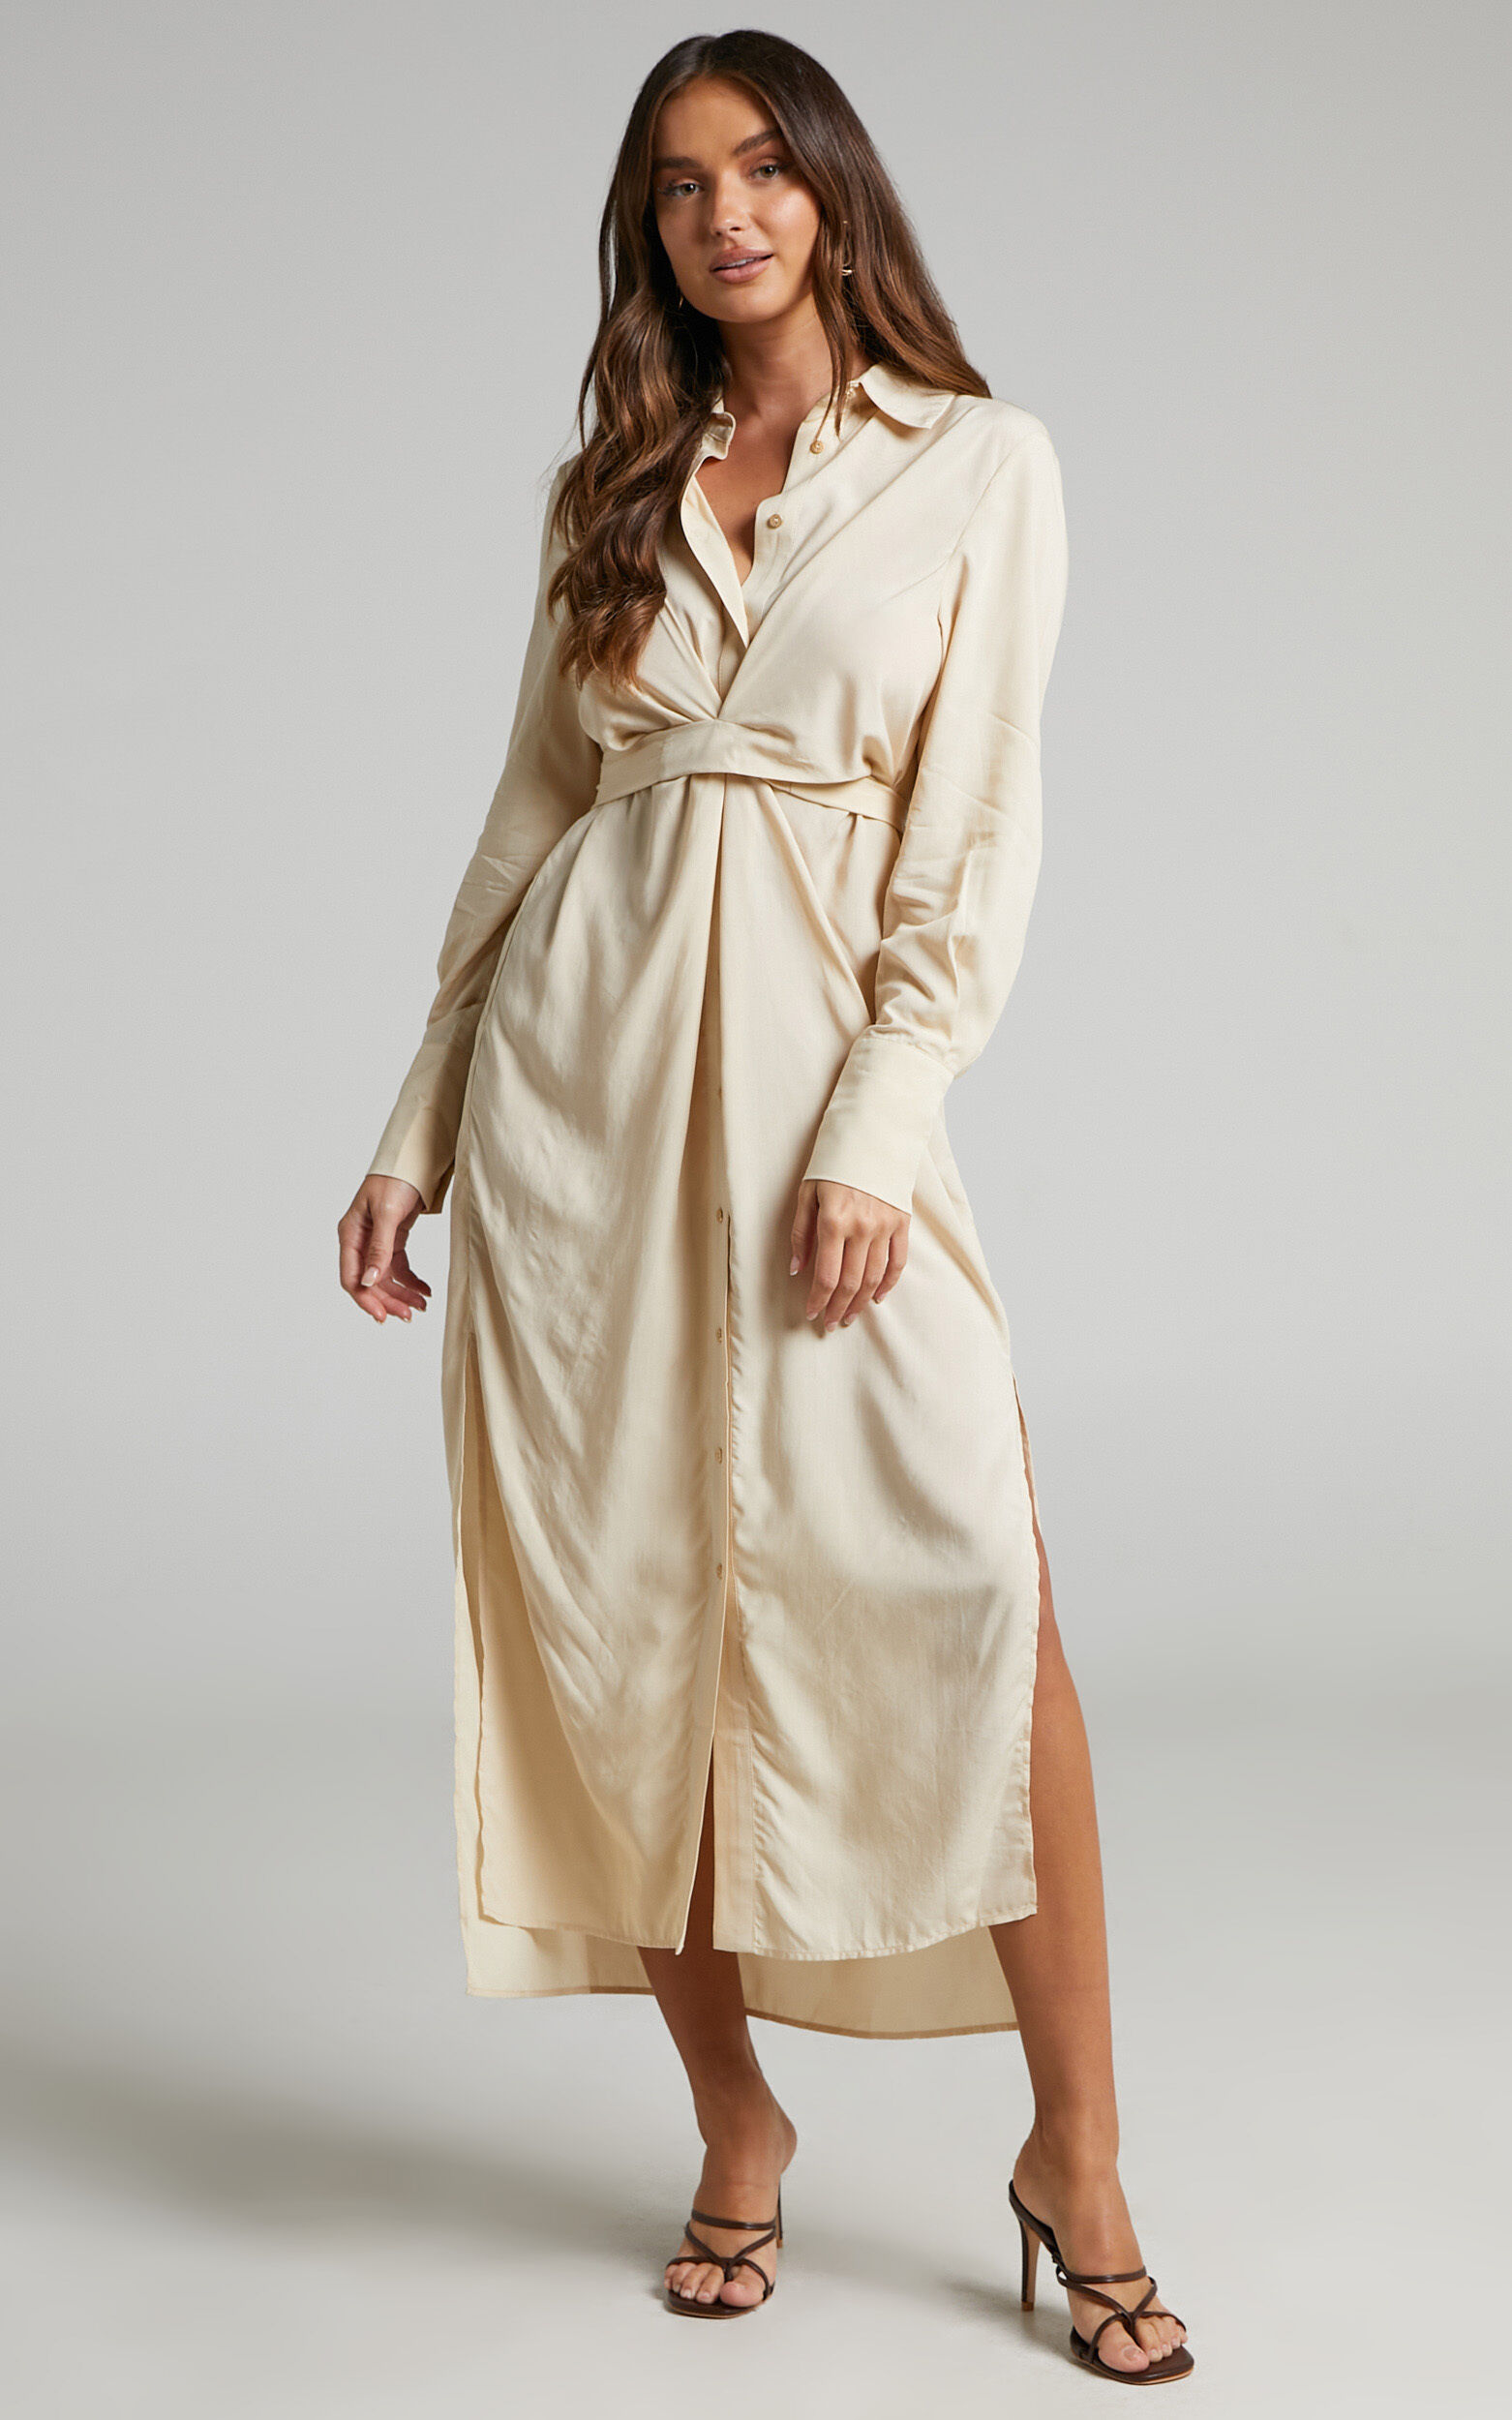 Trinidad Twist Front Button Through Maxi Dress in Sand - 04, BRN2, super-hi-res image number null